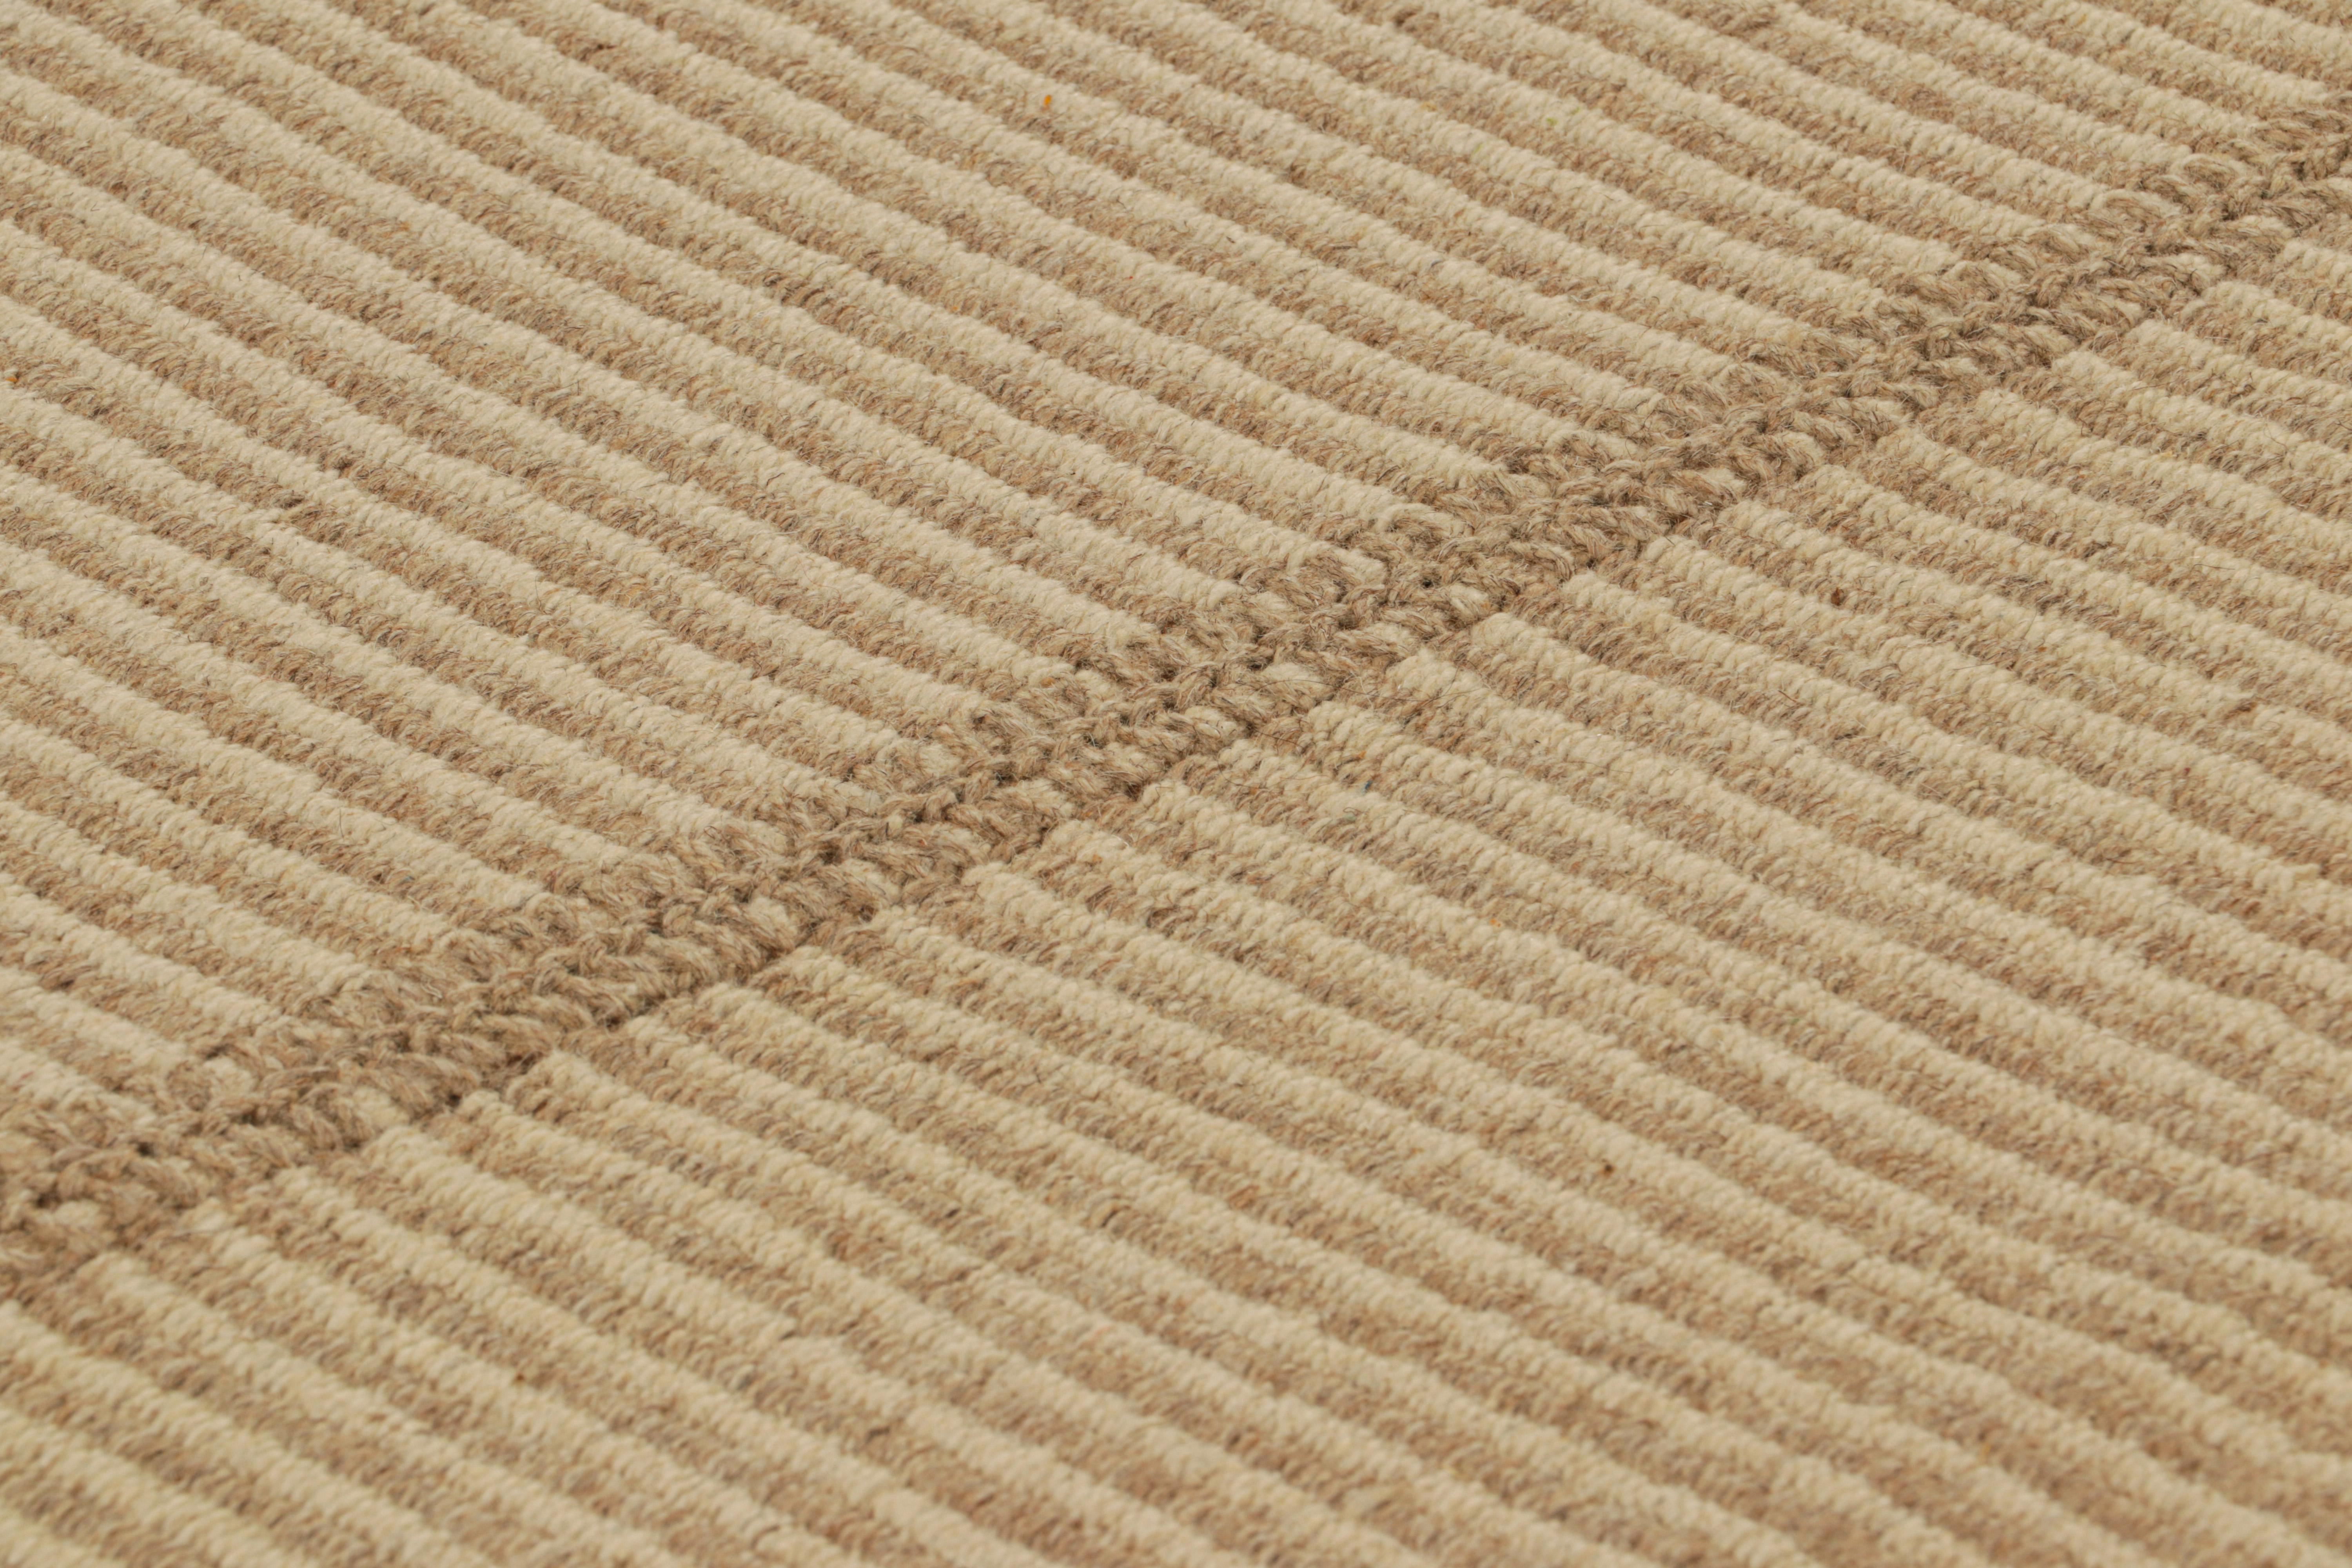 Handwoven in wool, a 9x12 Kilim design from an inventive new contemporary flat weave collection by Rug & Kilim.

On the Design: 

Fondly dubbed, “Rez Kilims”, this modern take on classic panel-weaving enjoys a fabulous, unique play of beige and